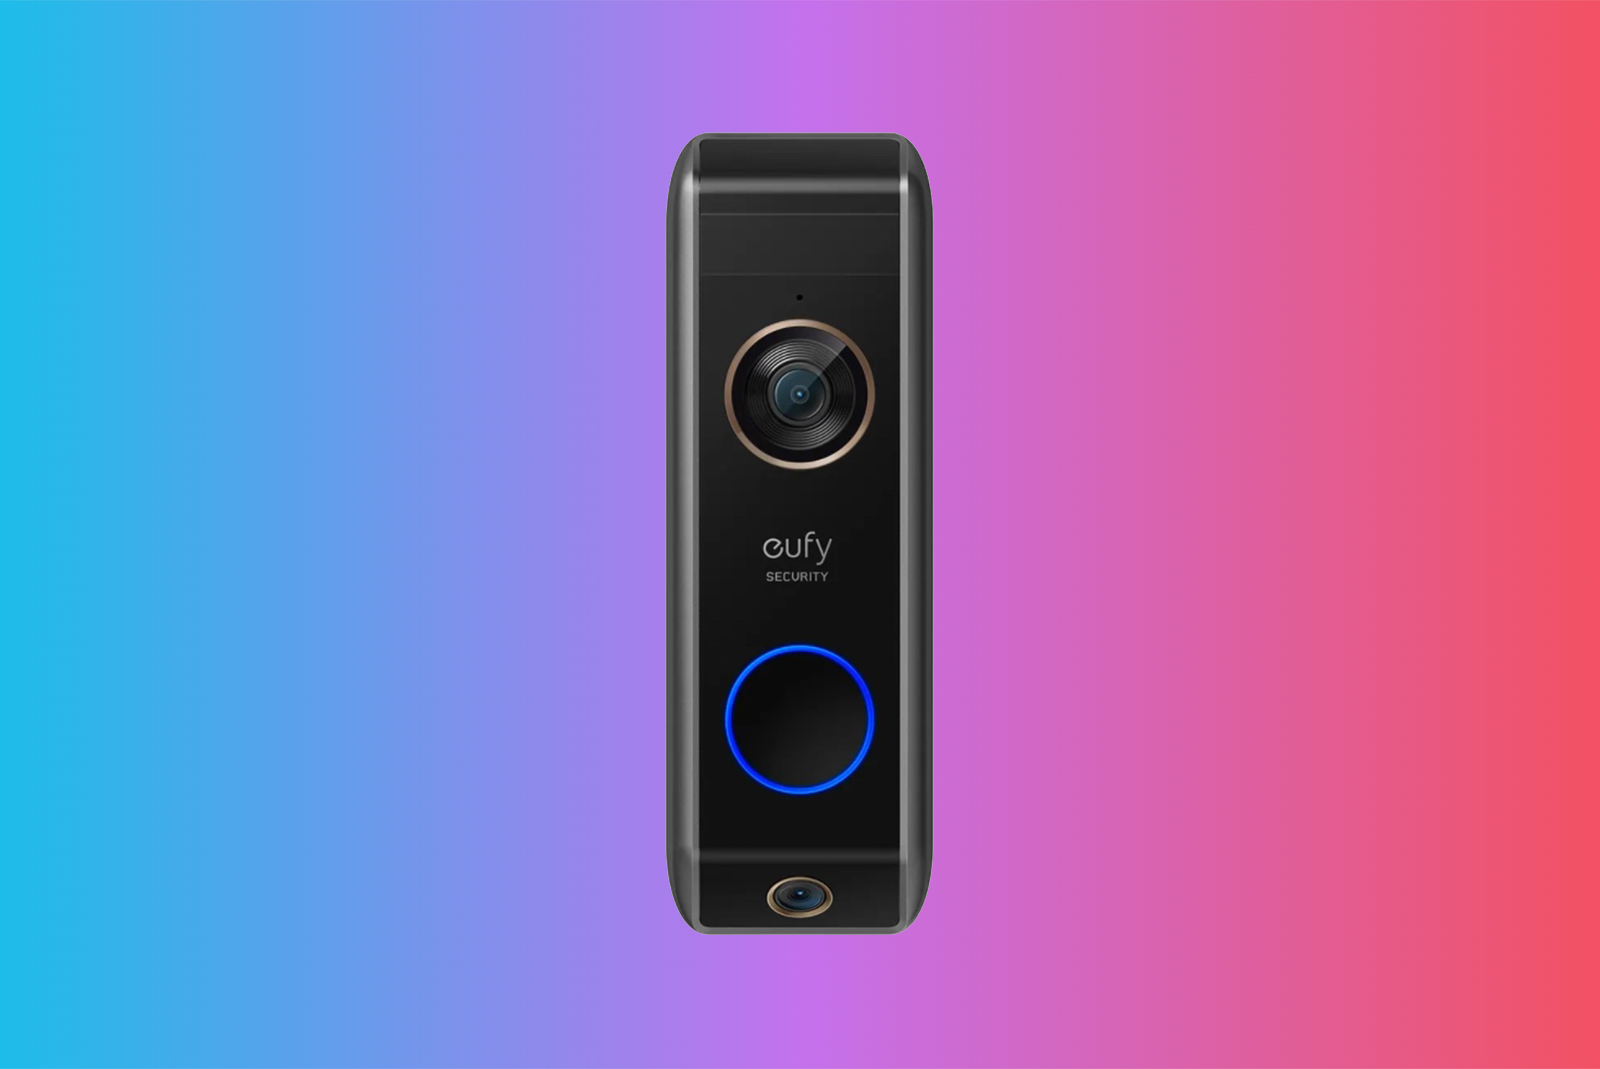 Eufy's new video doorbell has two cameras for person and package detection photo 3